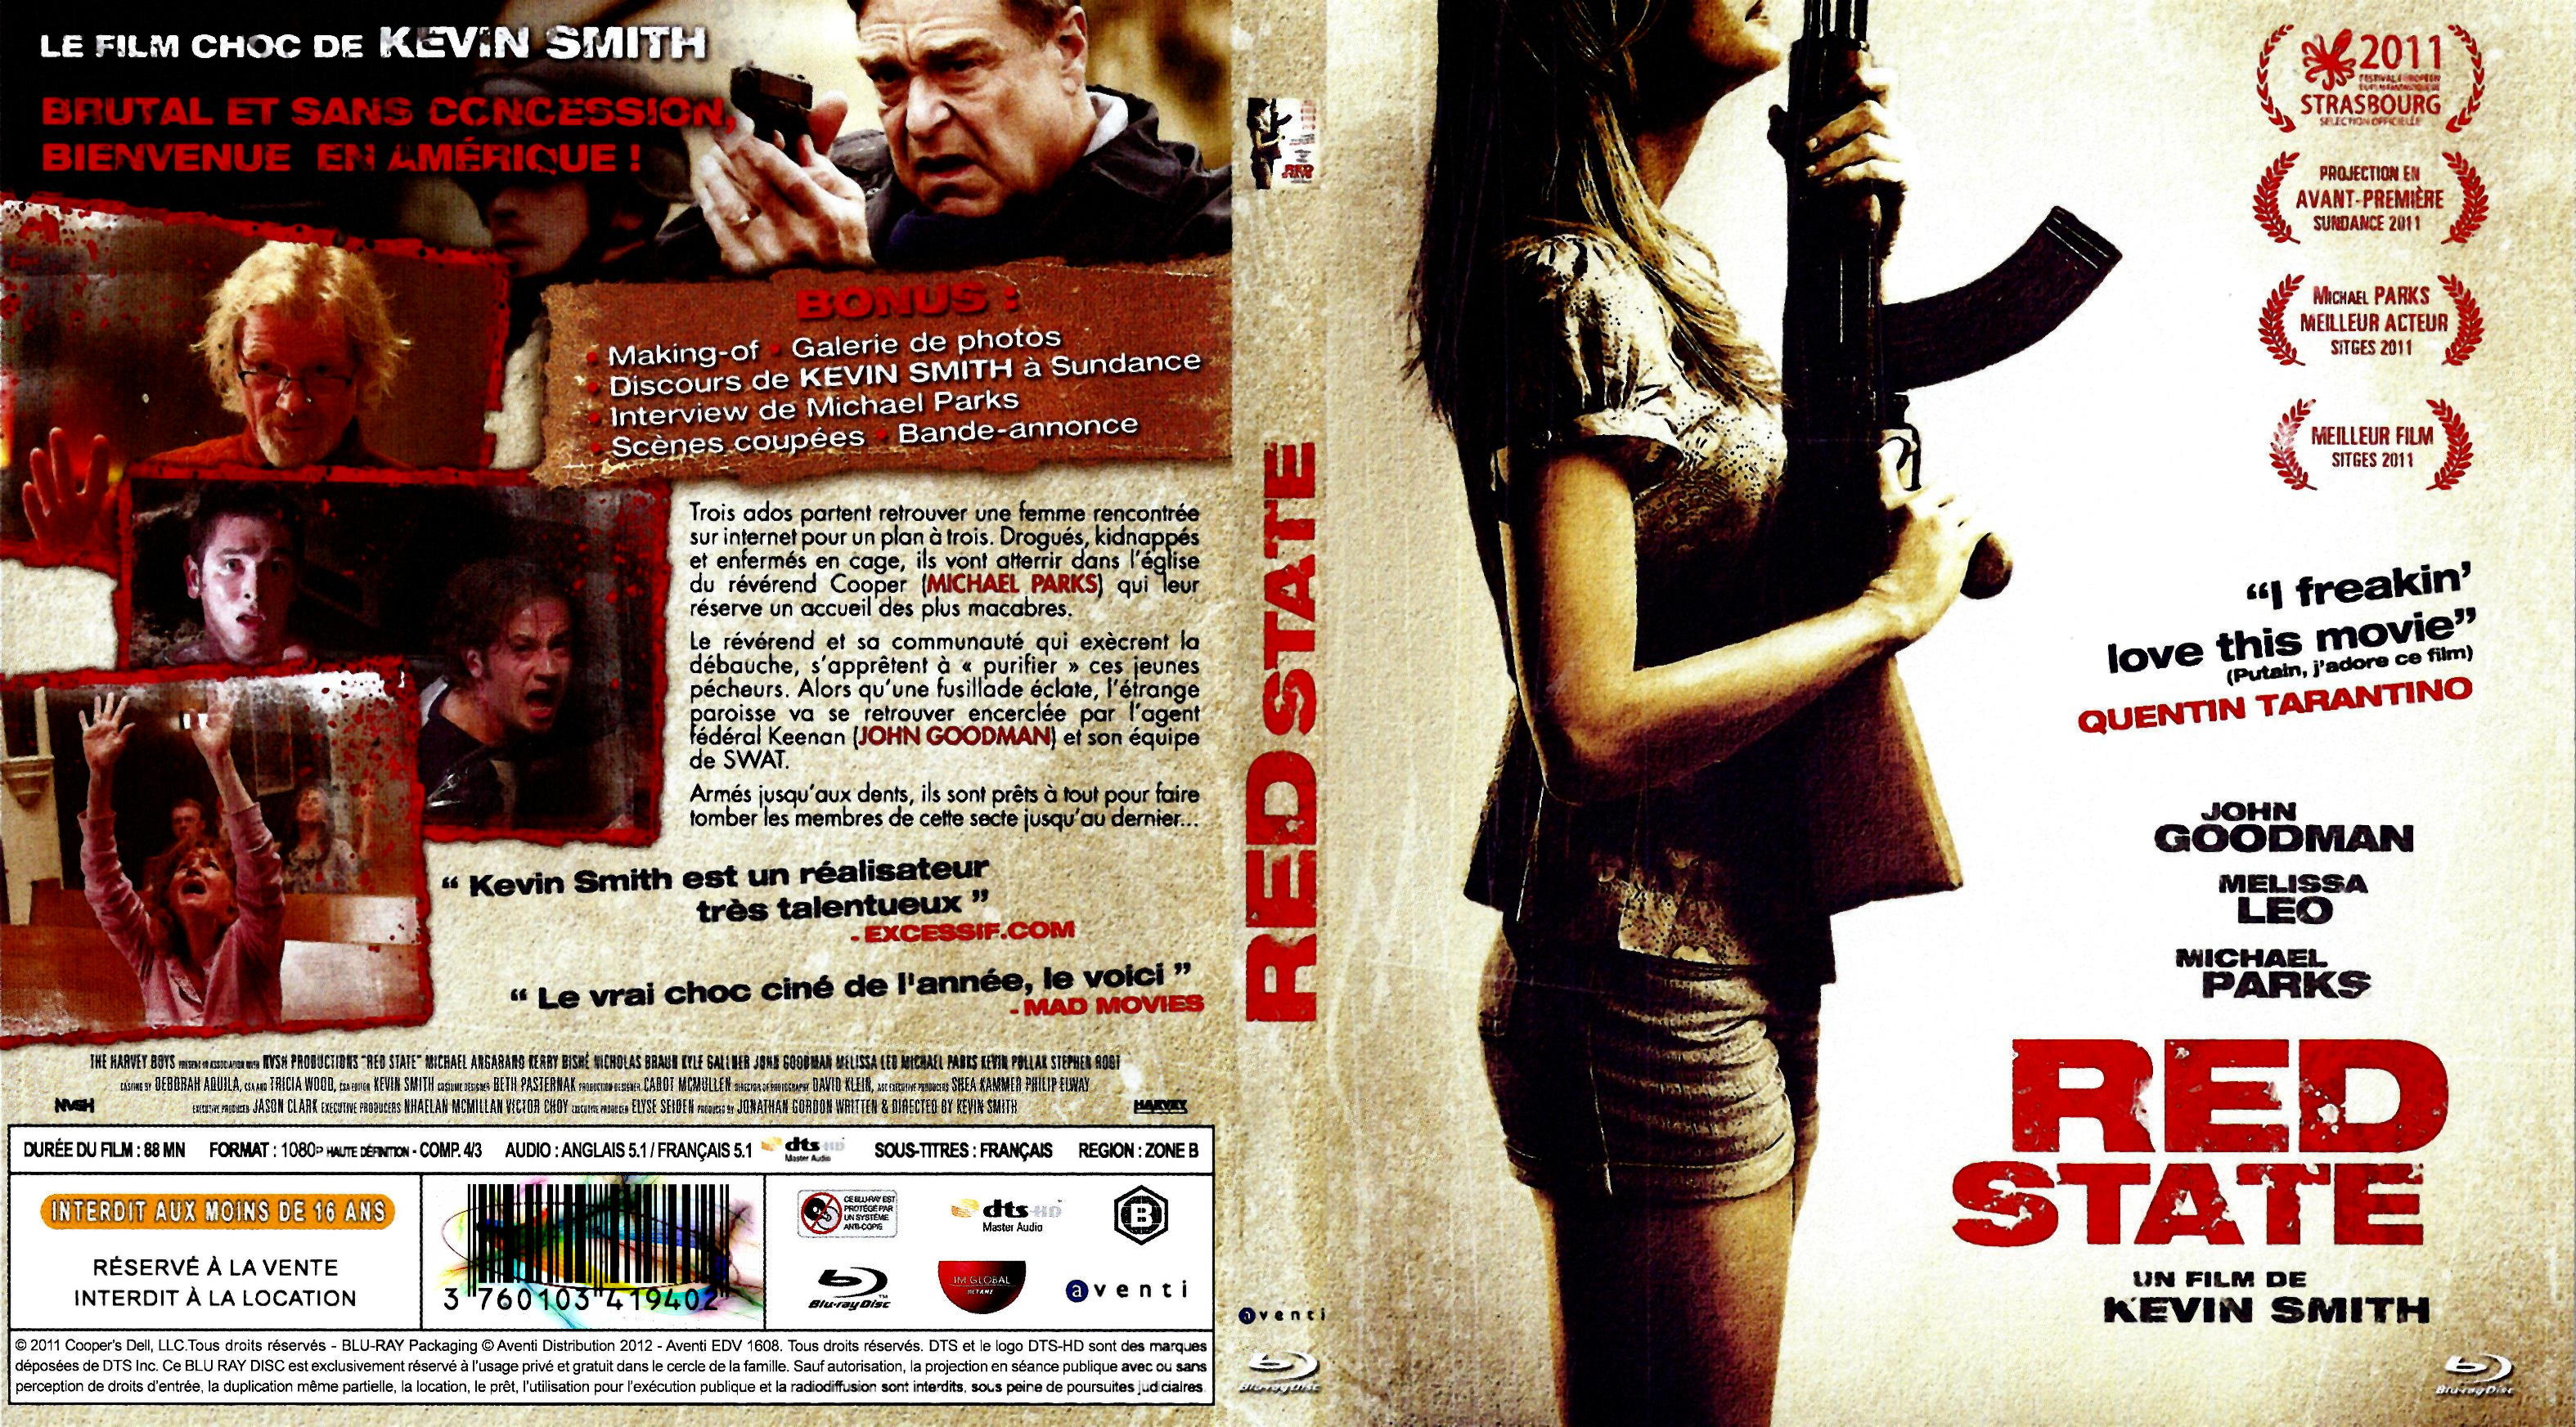 Jaquette DVD Red state (BLU-RAY)